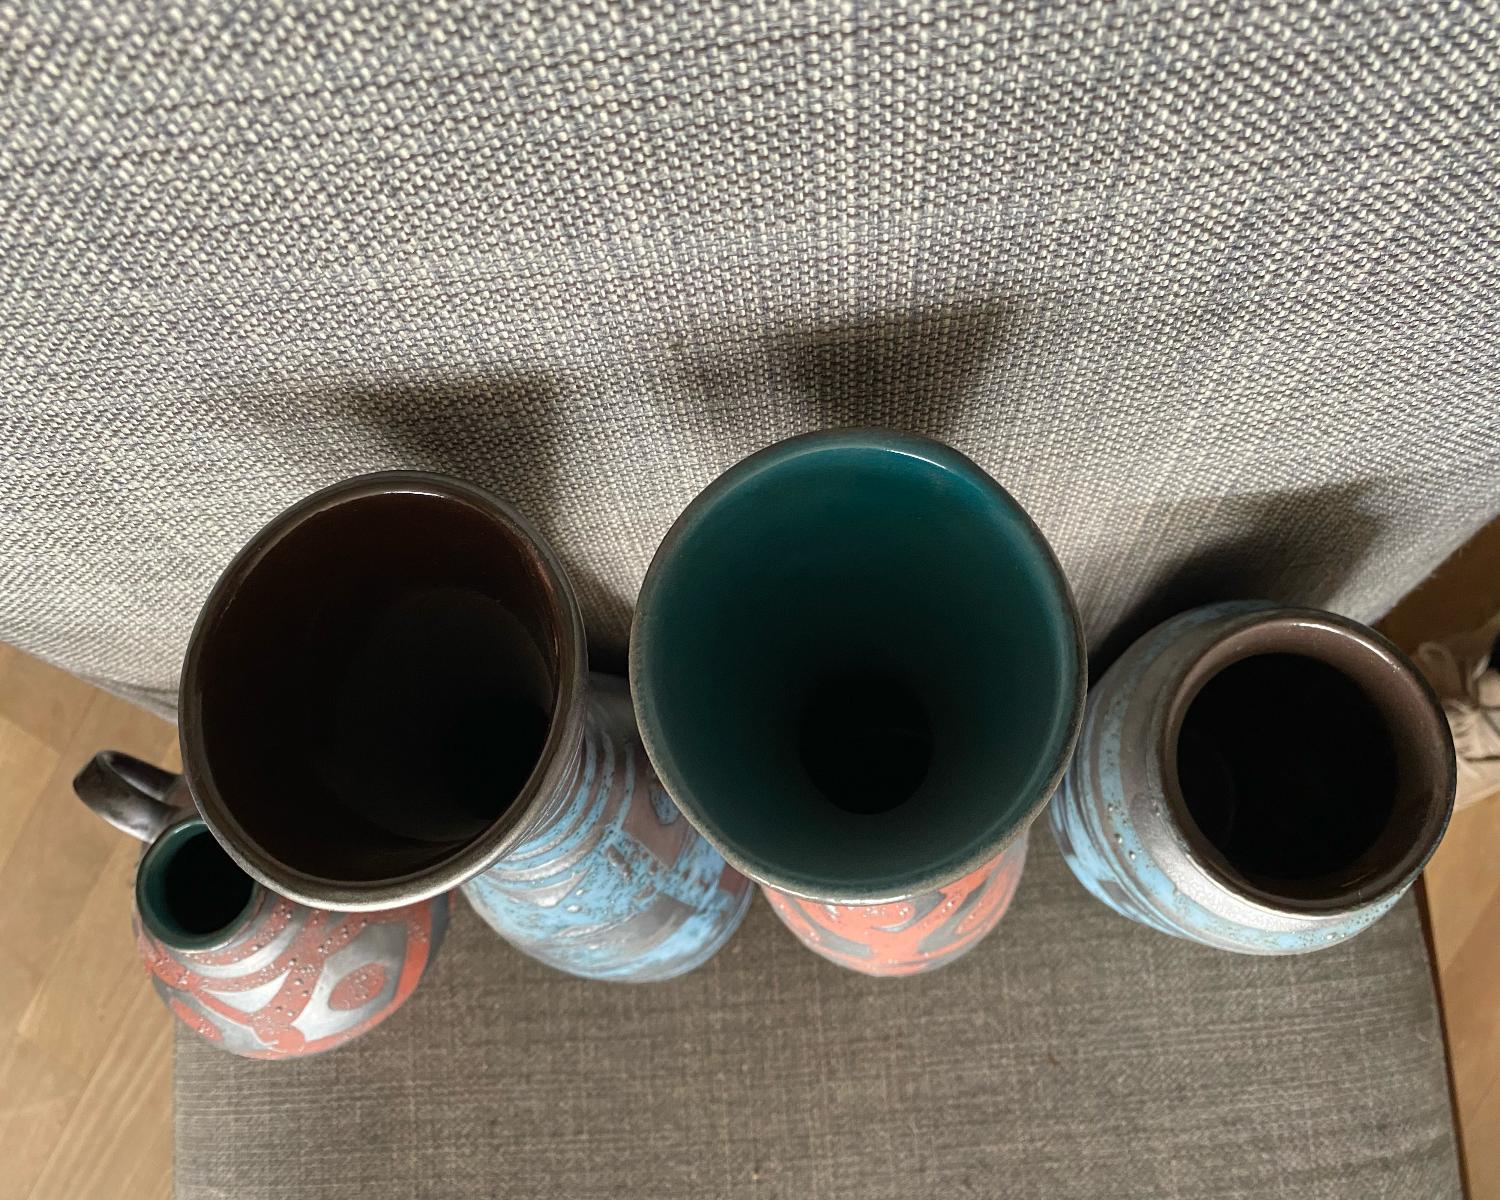 Mid-Century Carstens Tonnieshof Germany Set of 4 Vases In Good Condition For Sale In Waddinxveen, ZH